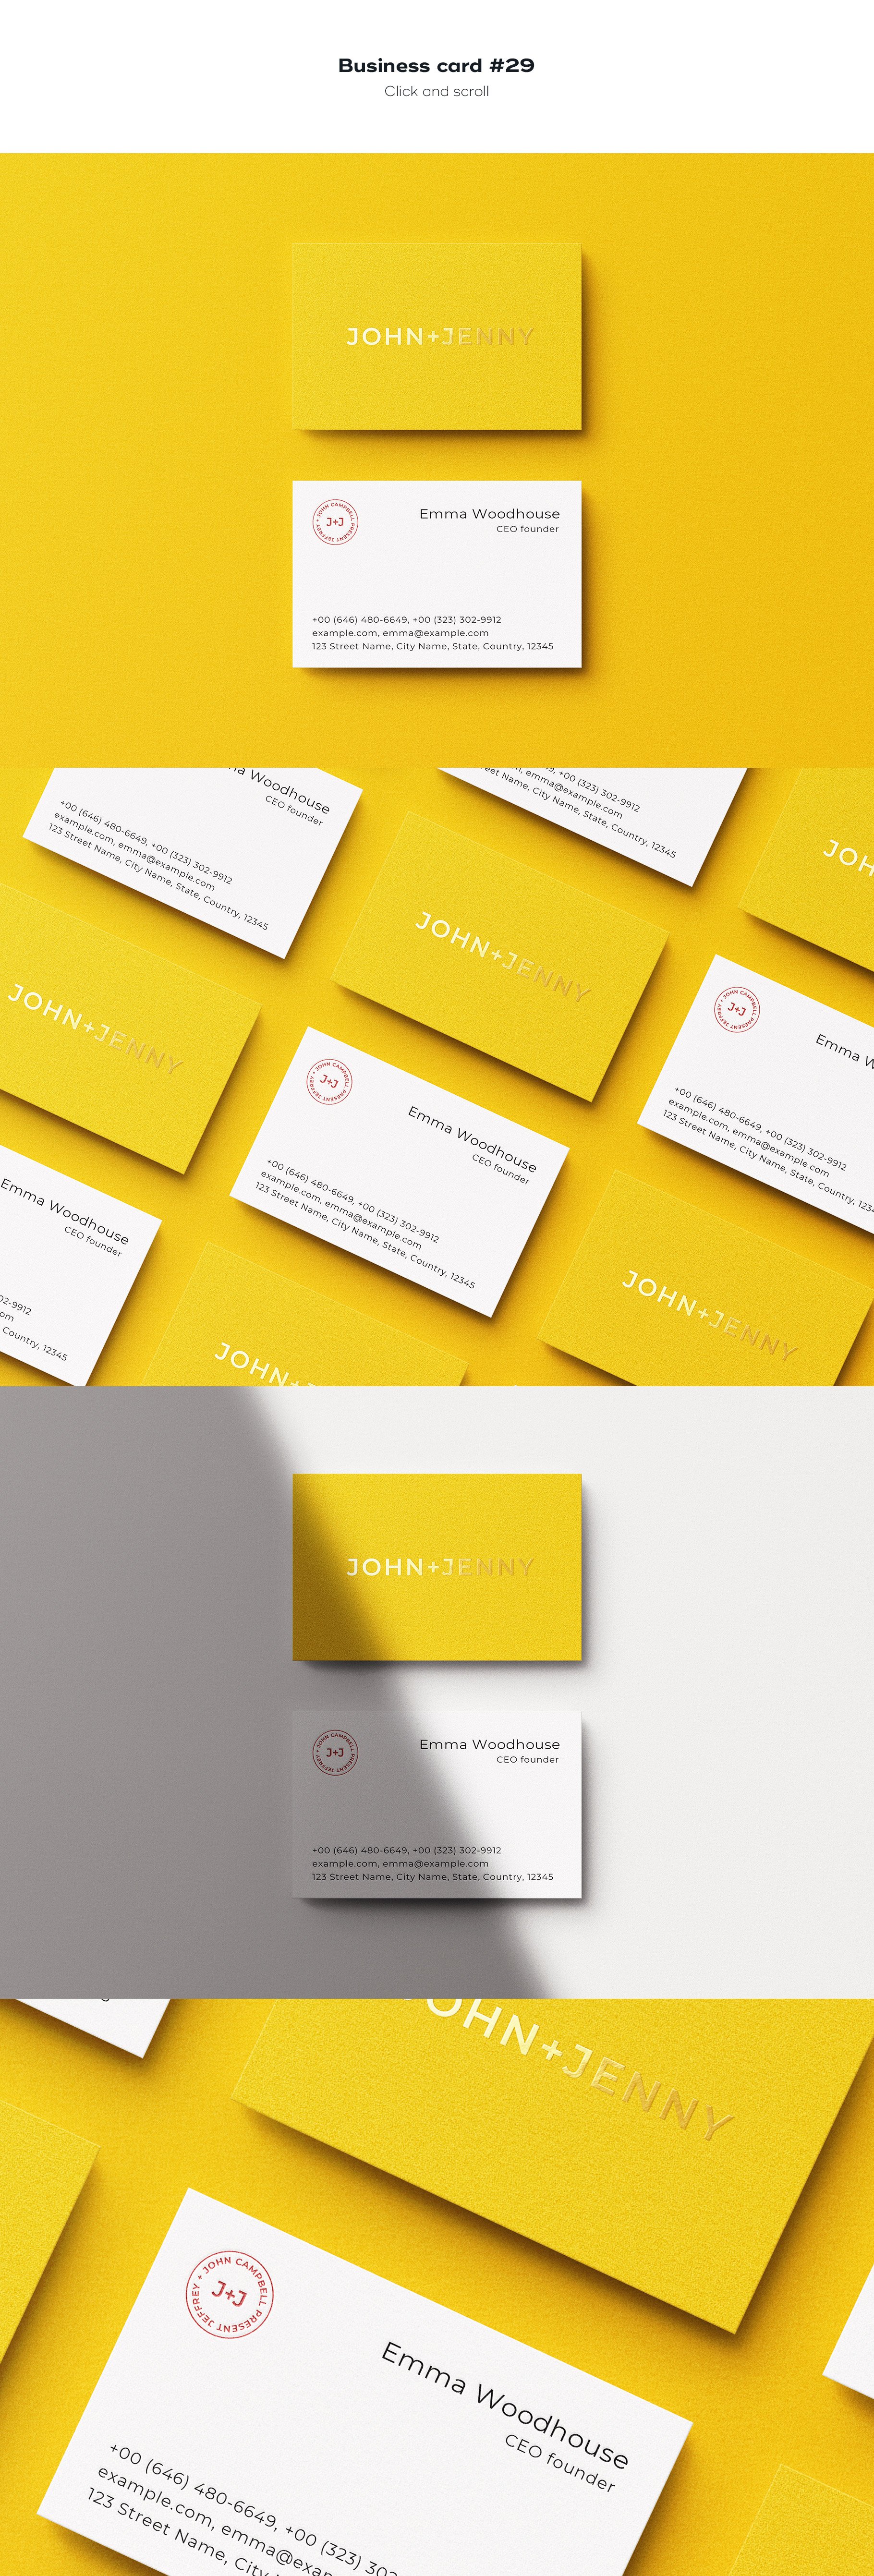 business card 29 934